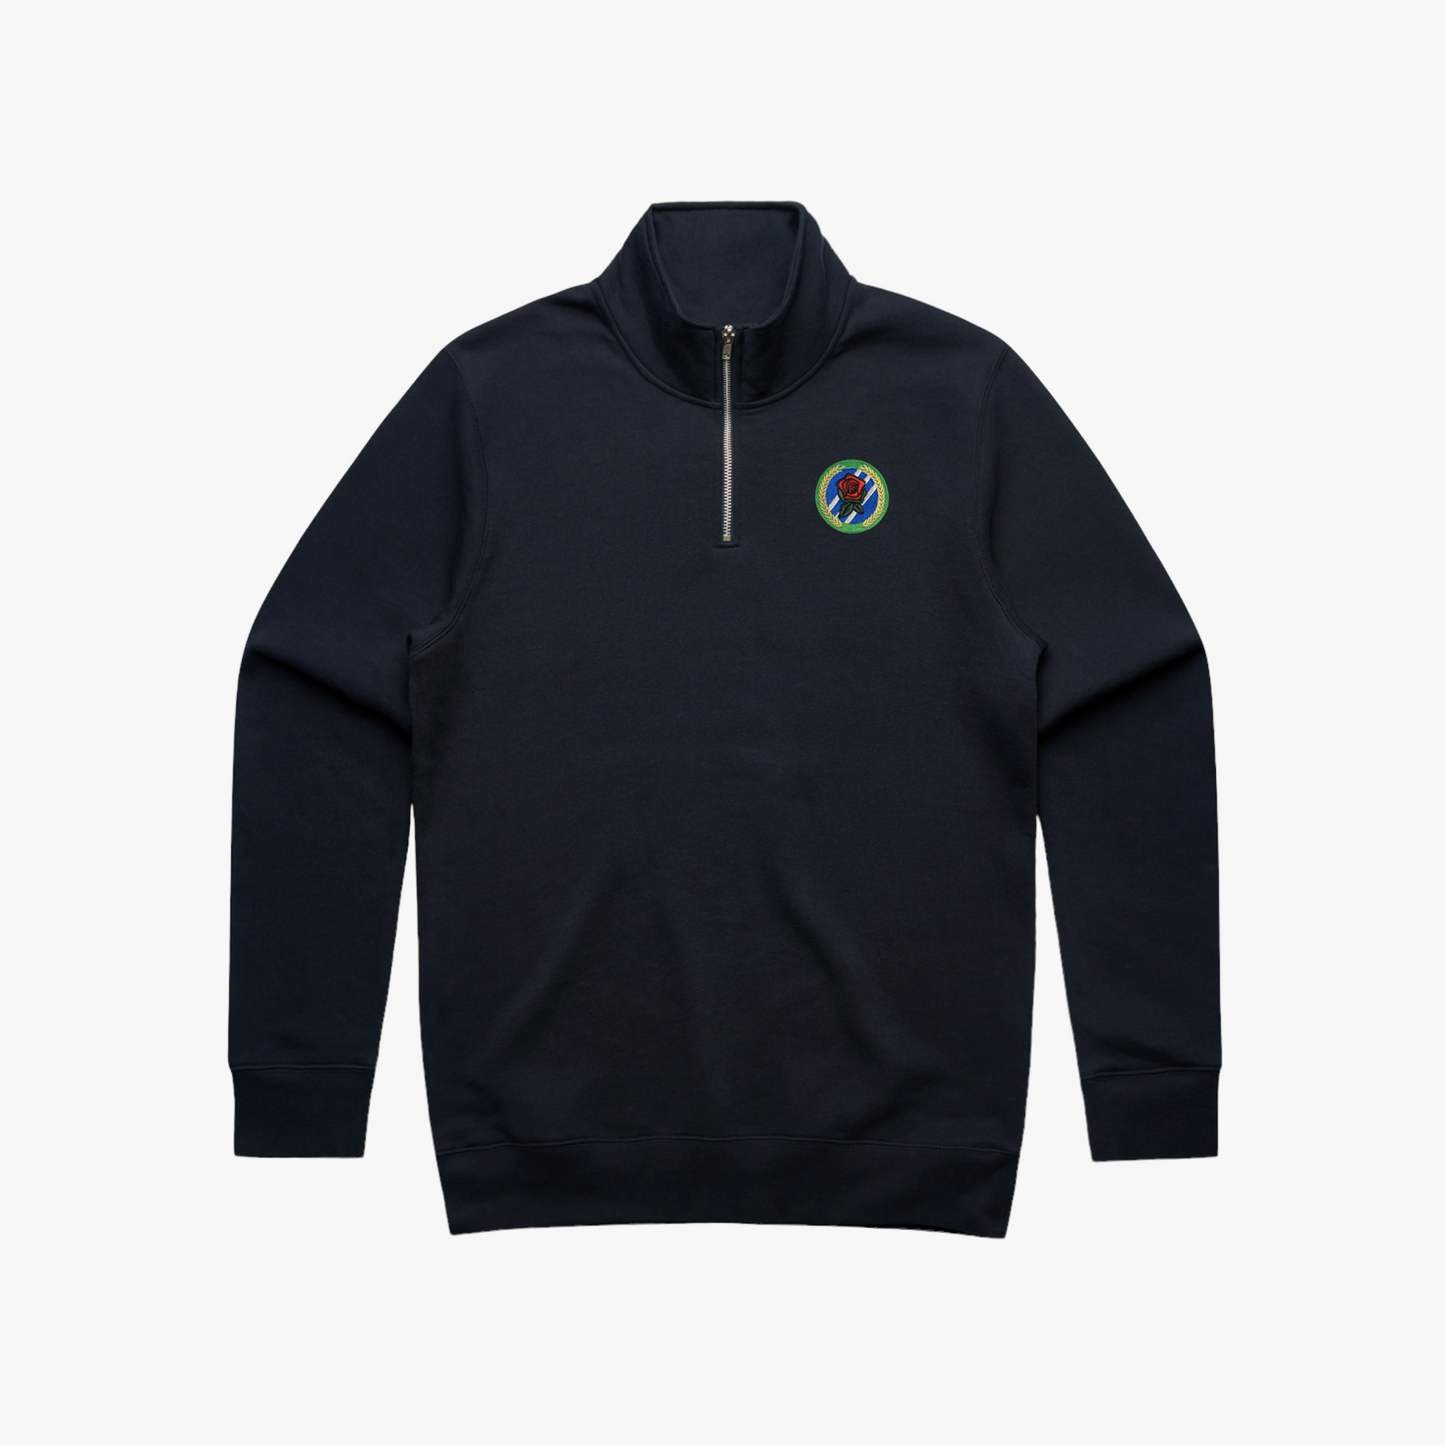 Rosehill half-zip 3 Colors Available